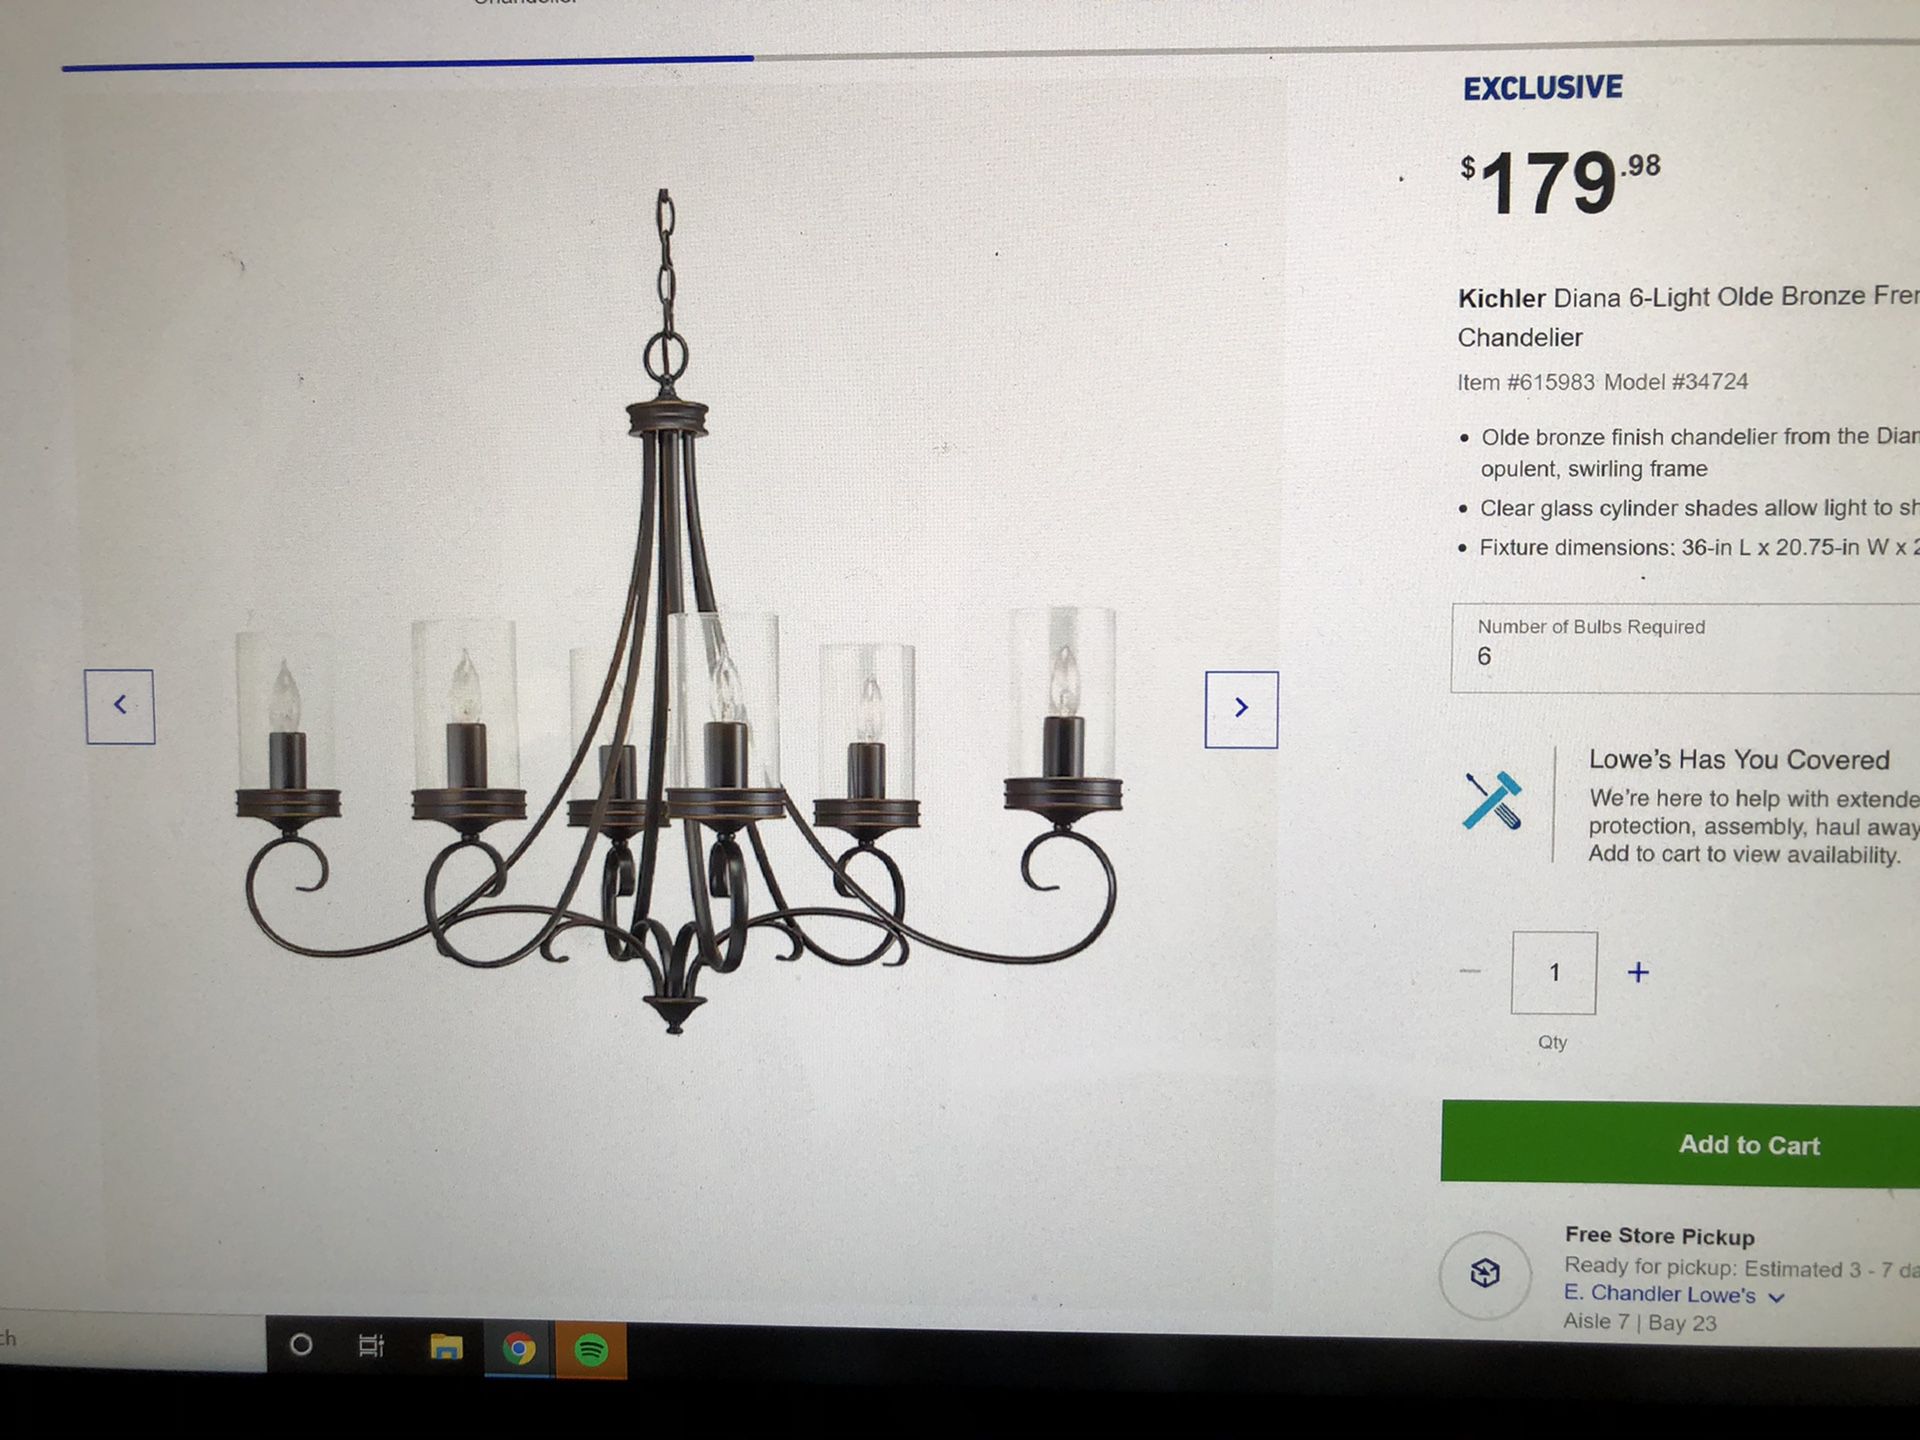 Kichler Diana 6-light old bronze French country cottage chandelier